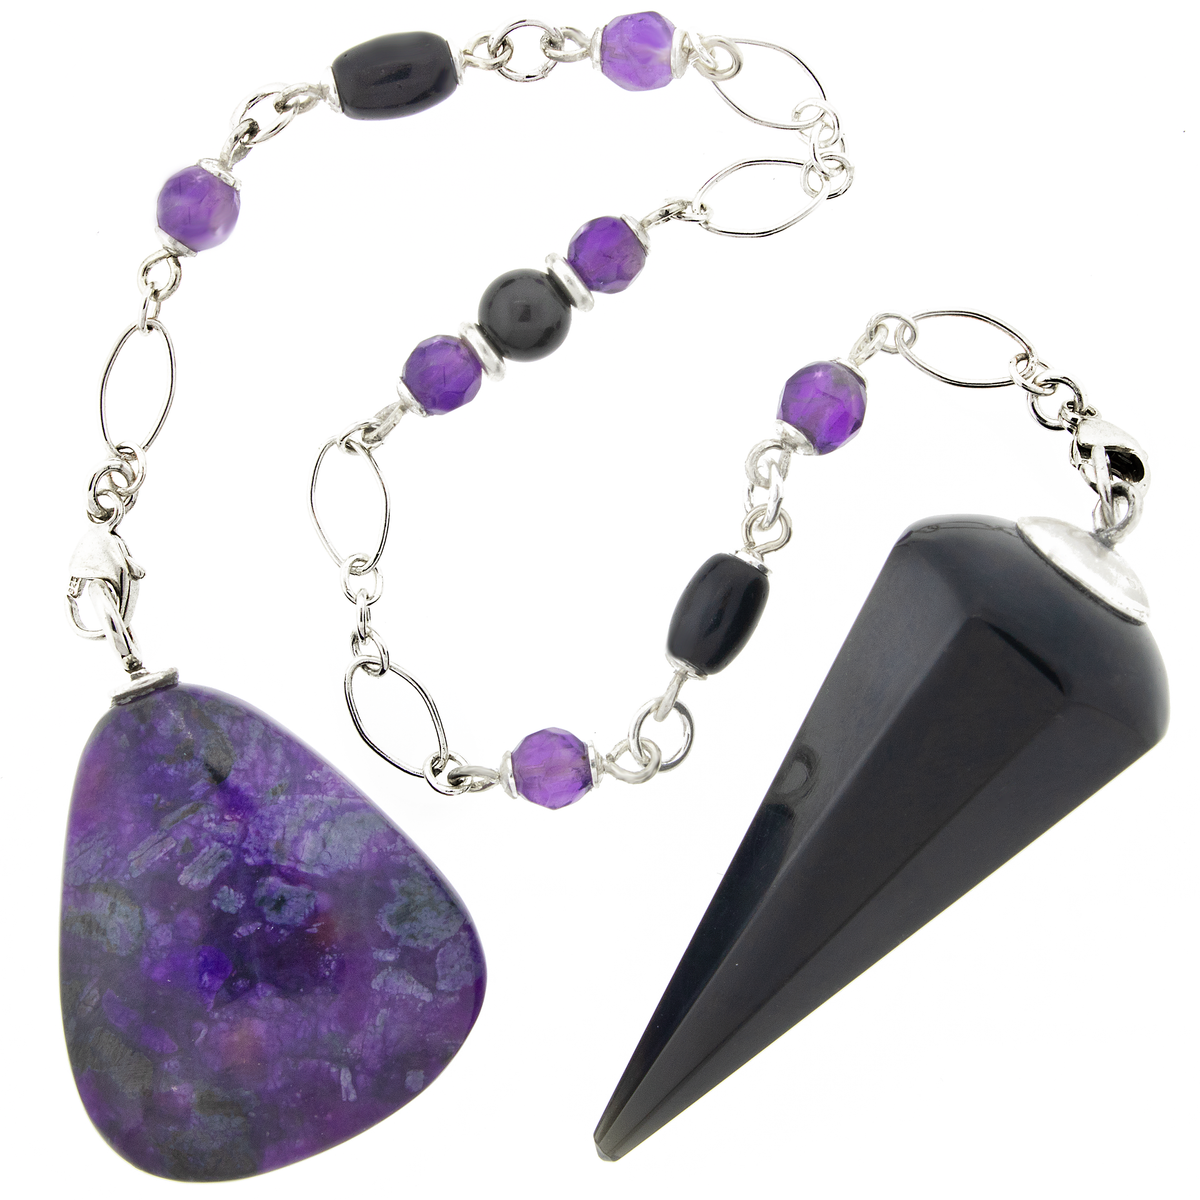 One of a Kind #396 - Black Obsidian, Sugilite, Amethyst, Rainbow Obsidian and Sterling Silver Pendulum by Ask Your Pendulum